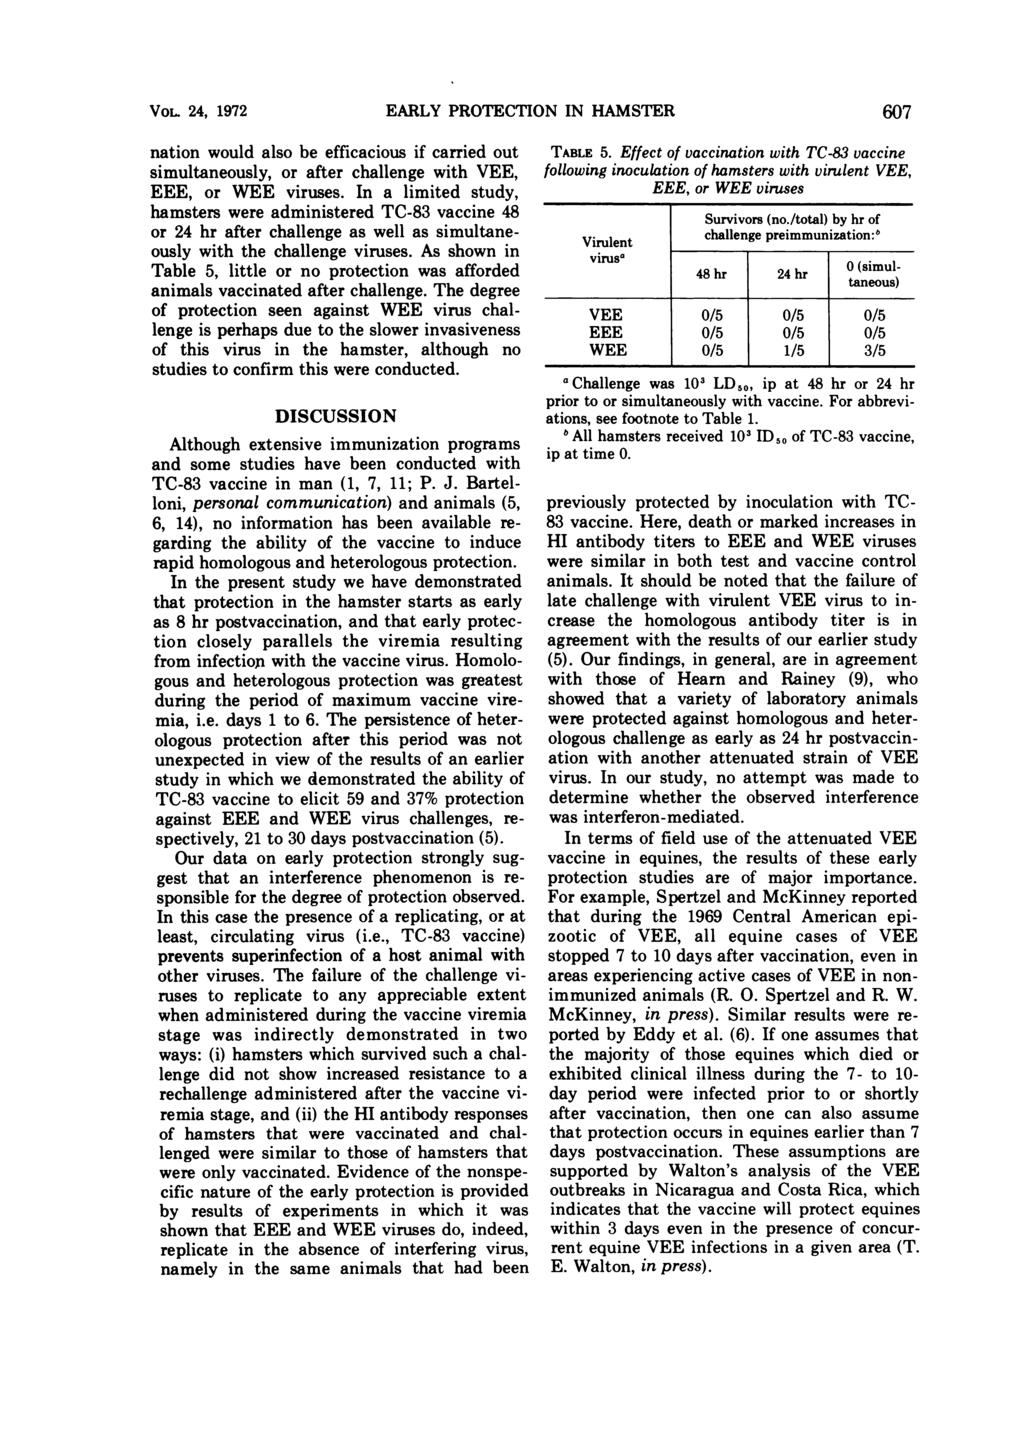 VOL. 24, 1972 EARLY PROTECTION IN HAMSTER 607 ntion would lso be efficcious if crried out simultneously, or fter chllenge with VEE, EEE, or WEE viruses.